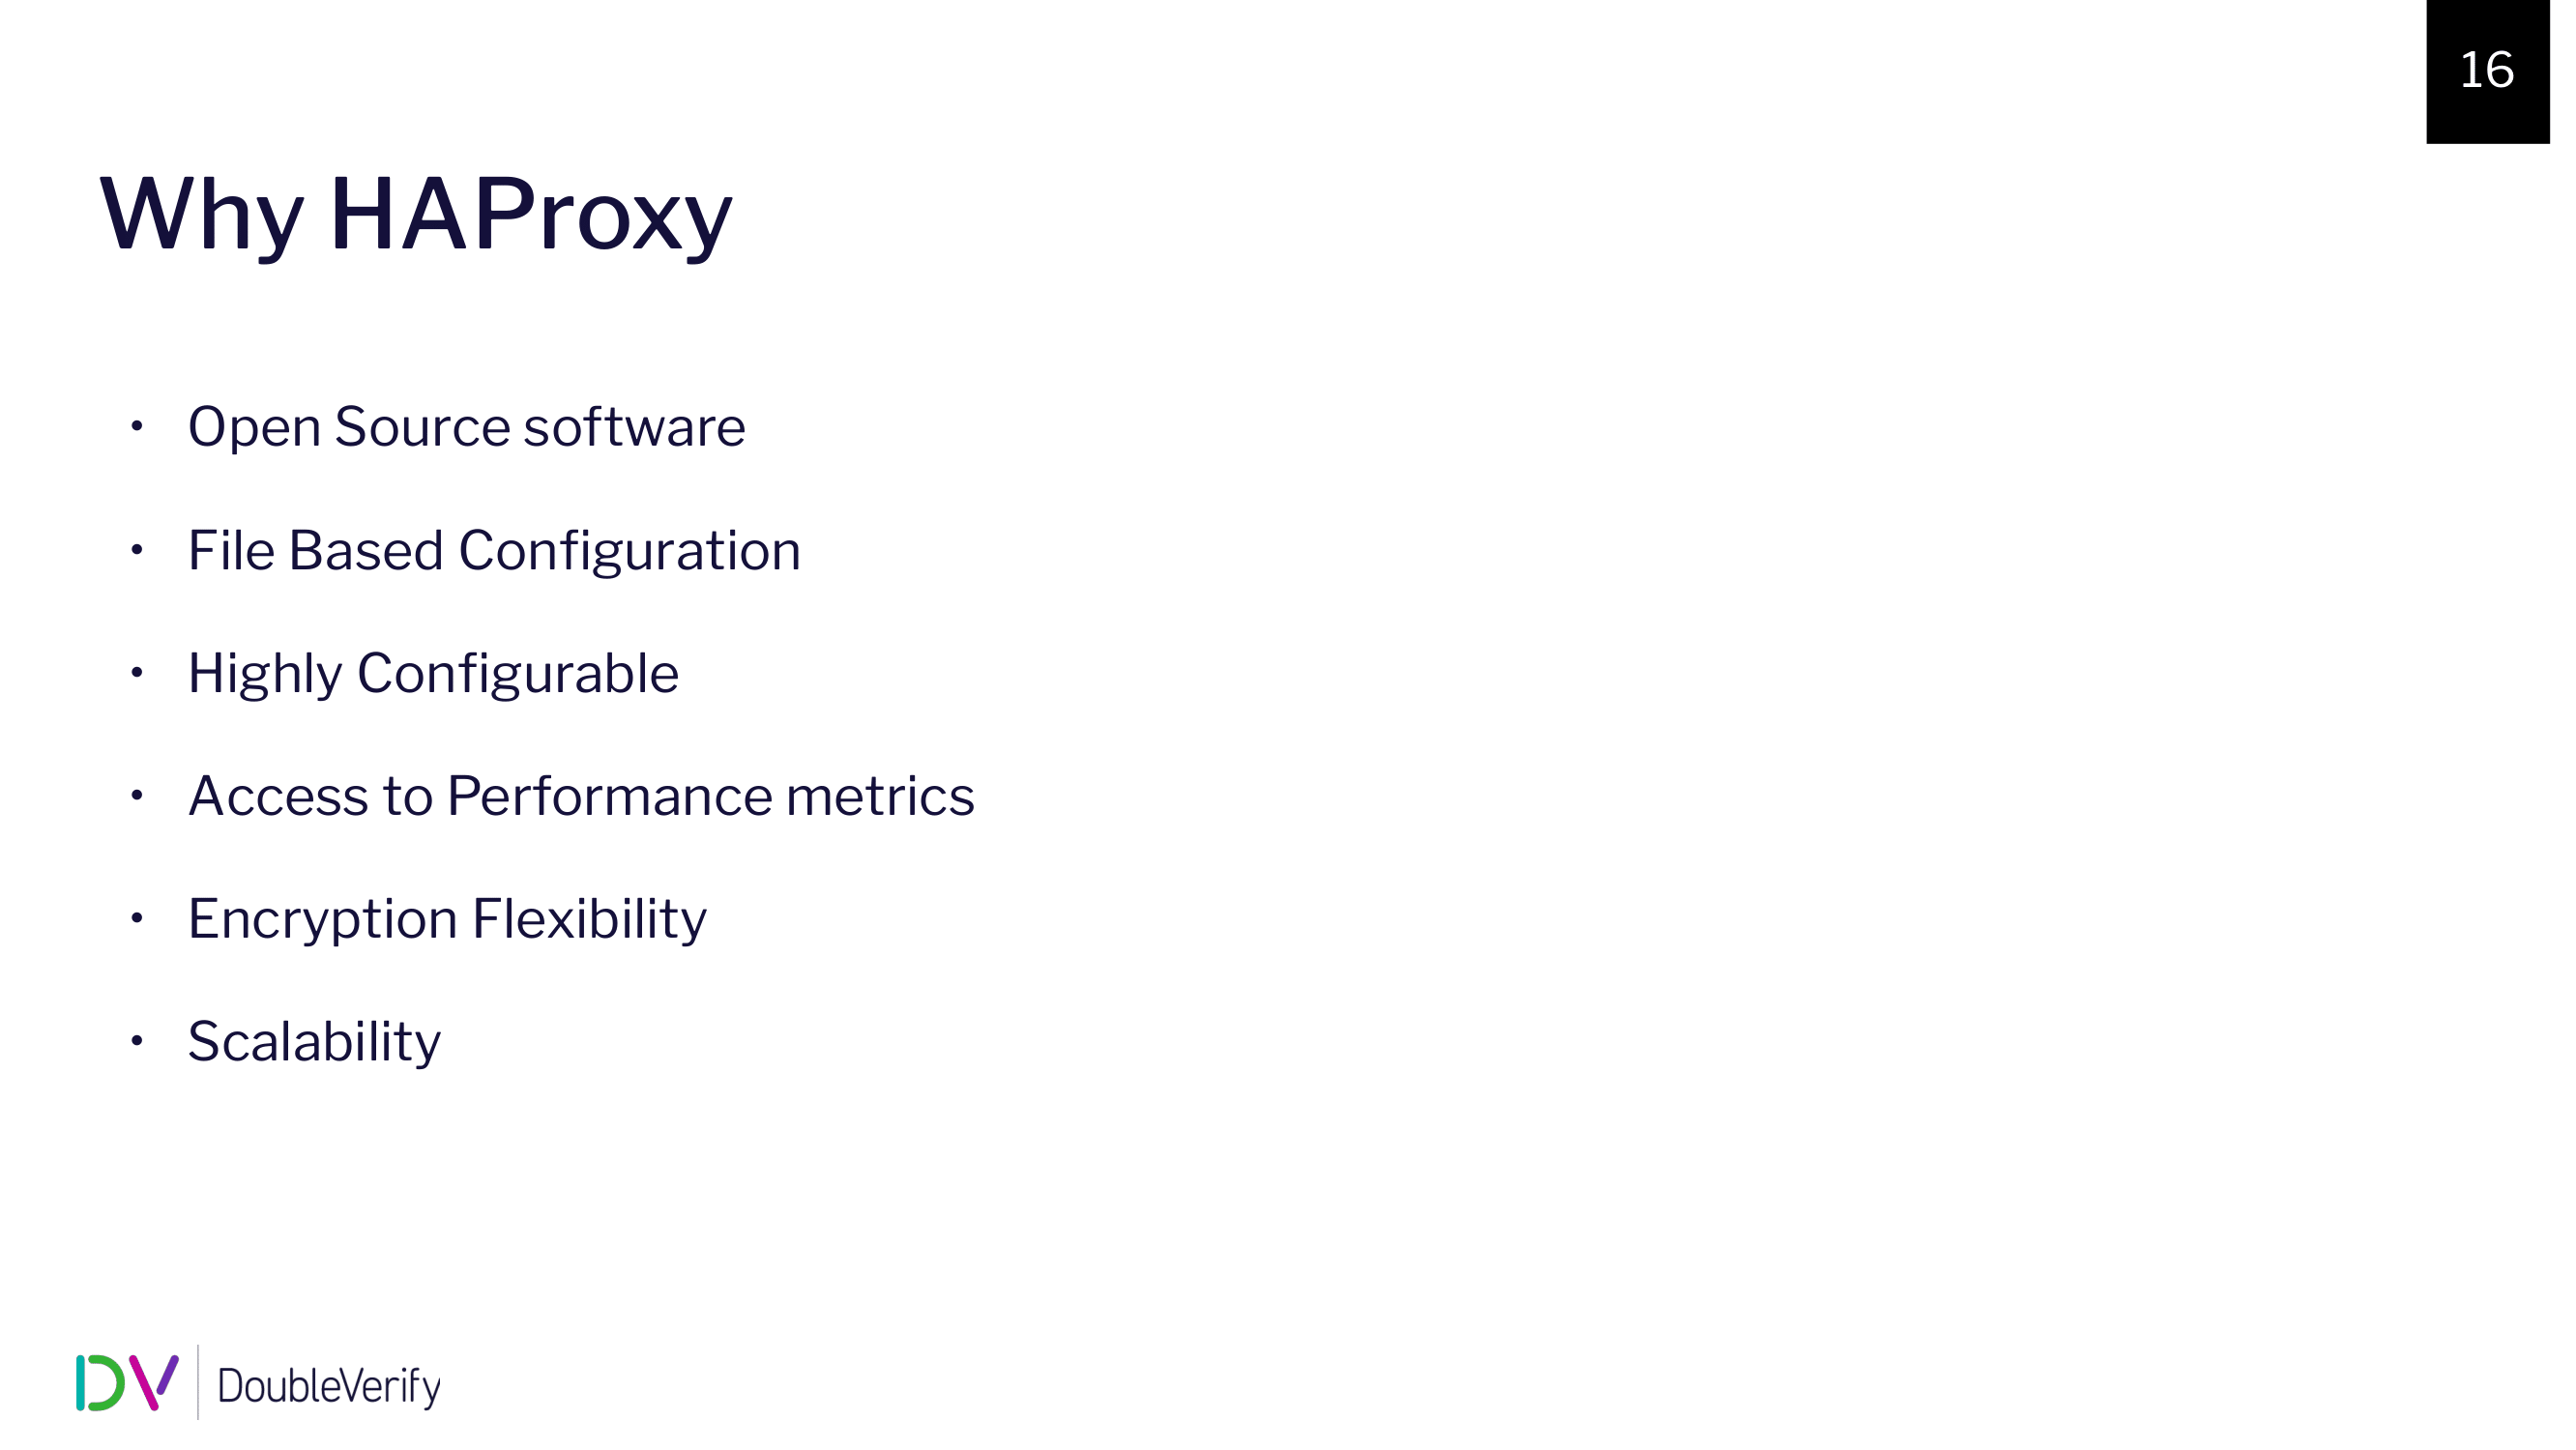 haproxyconf2019_a journey from hardware load balancers to haproxy at doubleverify_oren alexandroni_wally barnes_11